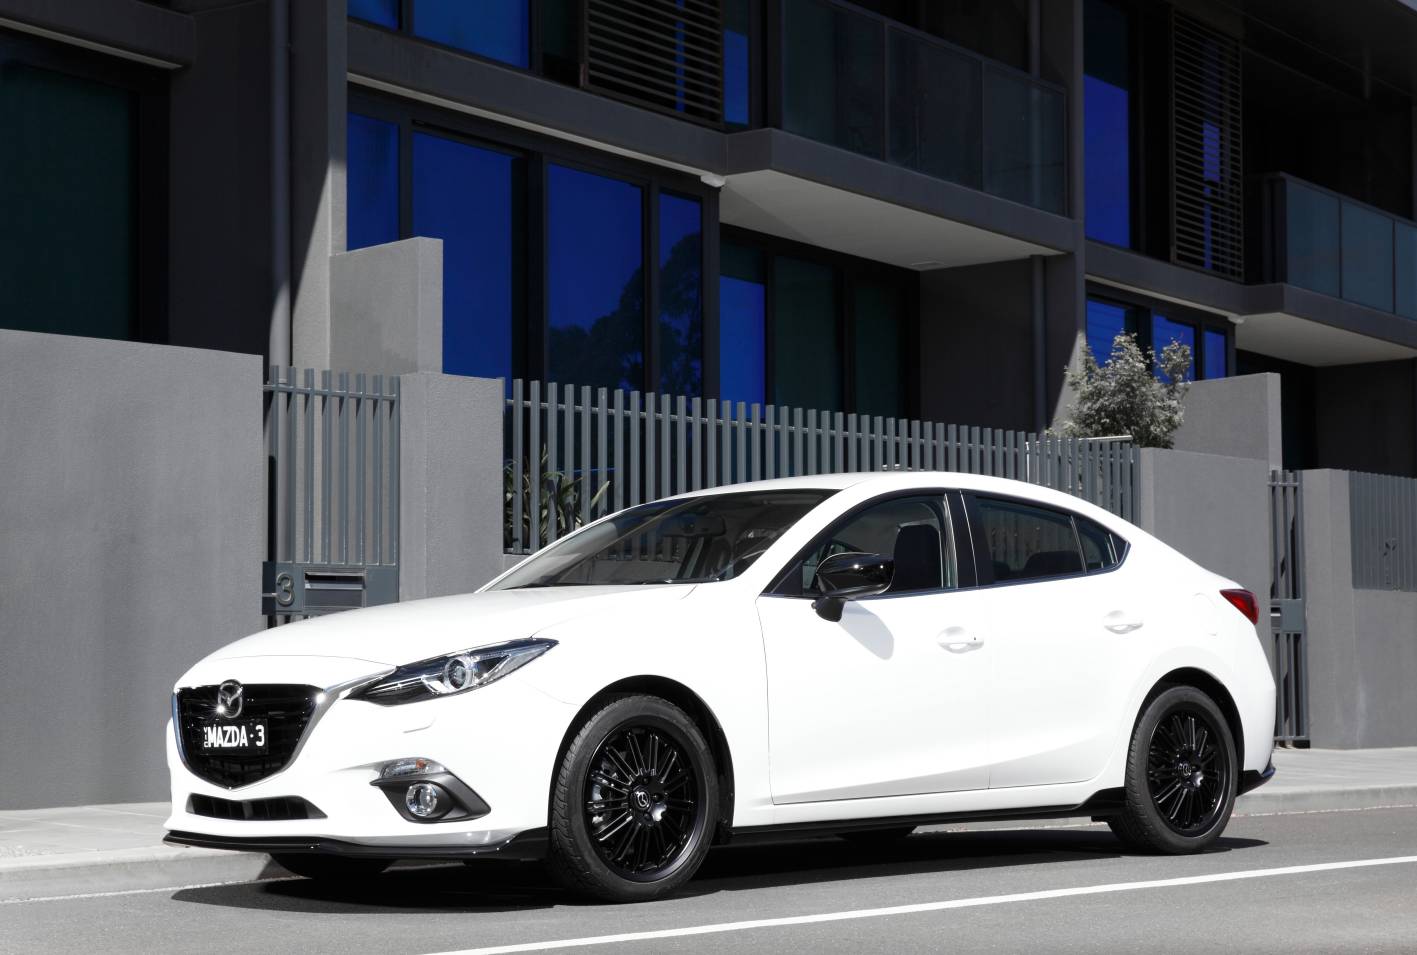 2015 Mazda 3 Reliability Issues